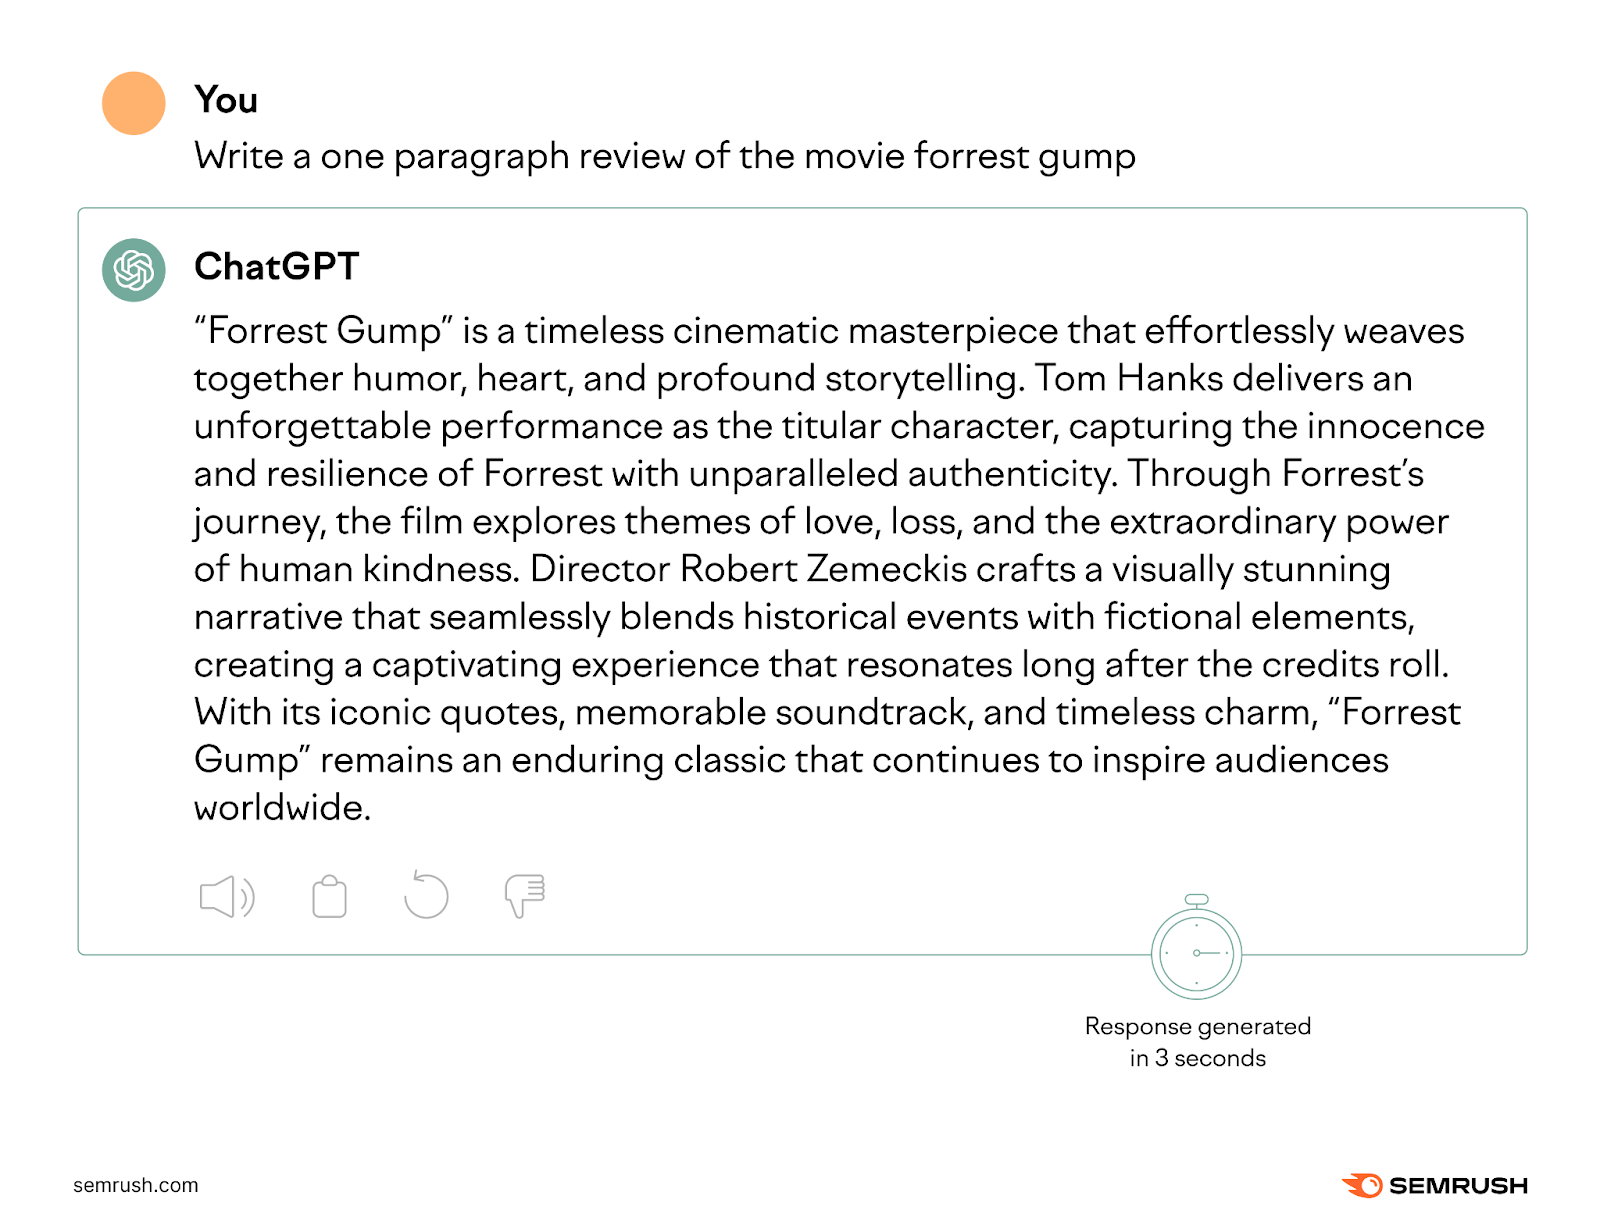 Conversation with ChatGPT to output a paragraph review of the movie “Forrest Gump.”